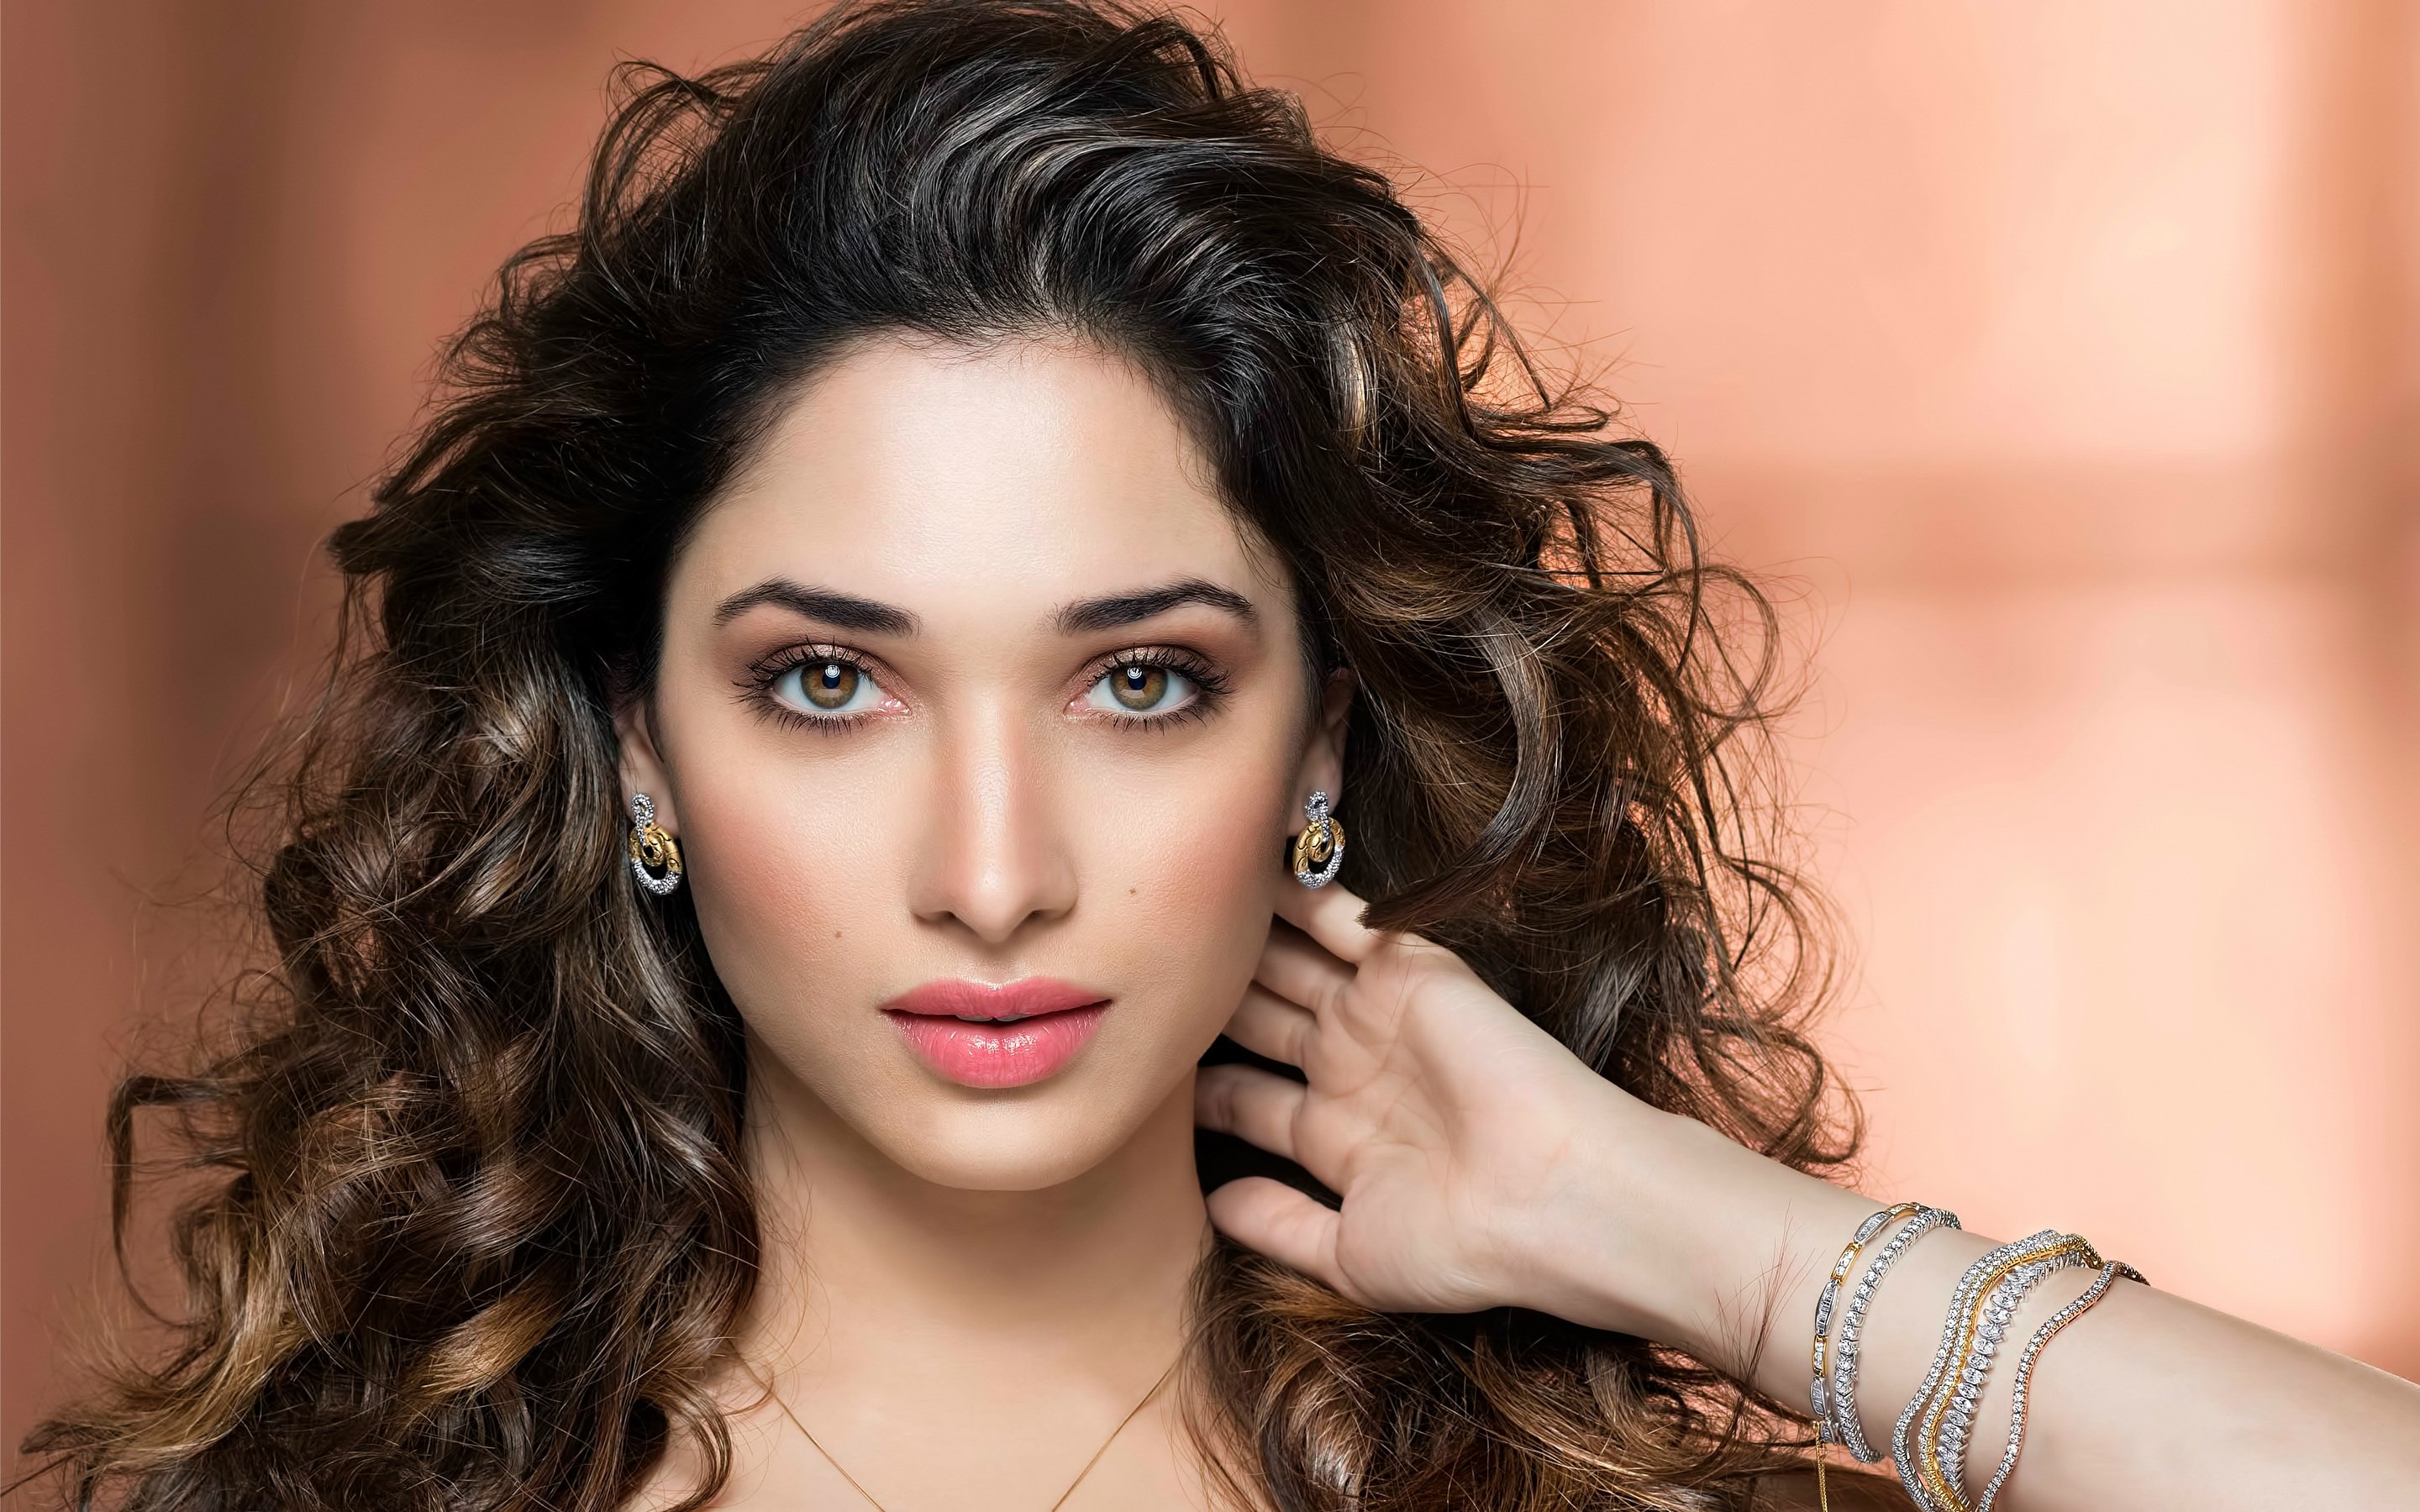 882721 Tamanna Bhatia Bollywood Actress Model Girl Beautiful Brunette Pretty Cute Beauty Sexy Hot Pose Face Eyes Hair Lips Smile Figure India 